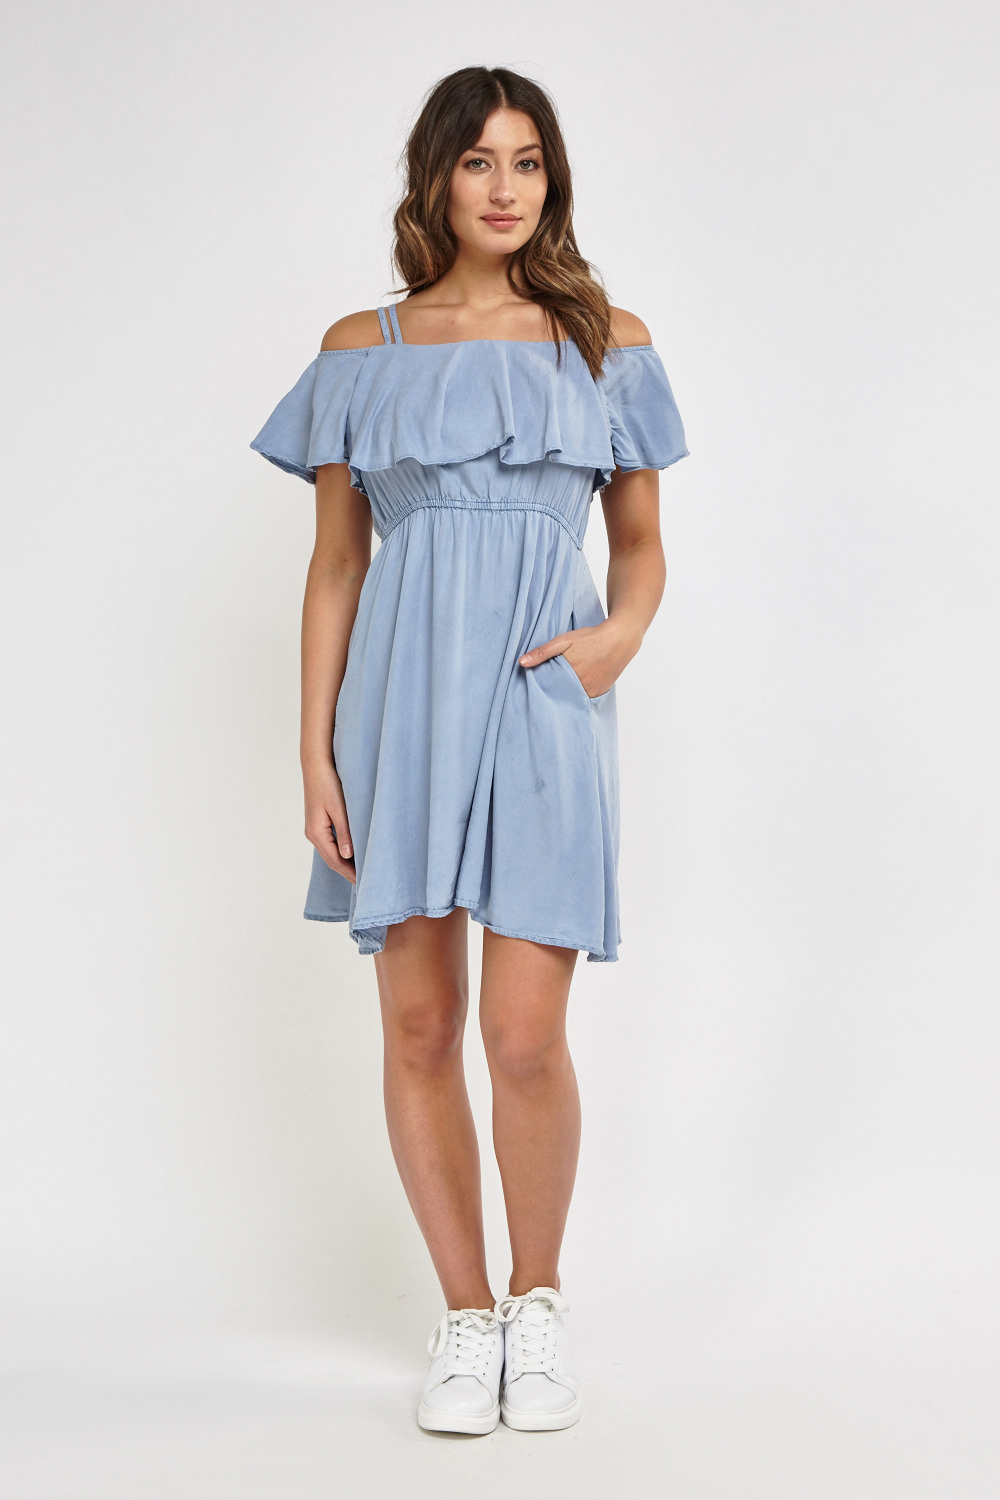 Twin Straps With Ruffle Overlay Off Shoulder Dress - Just $5